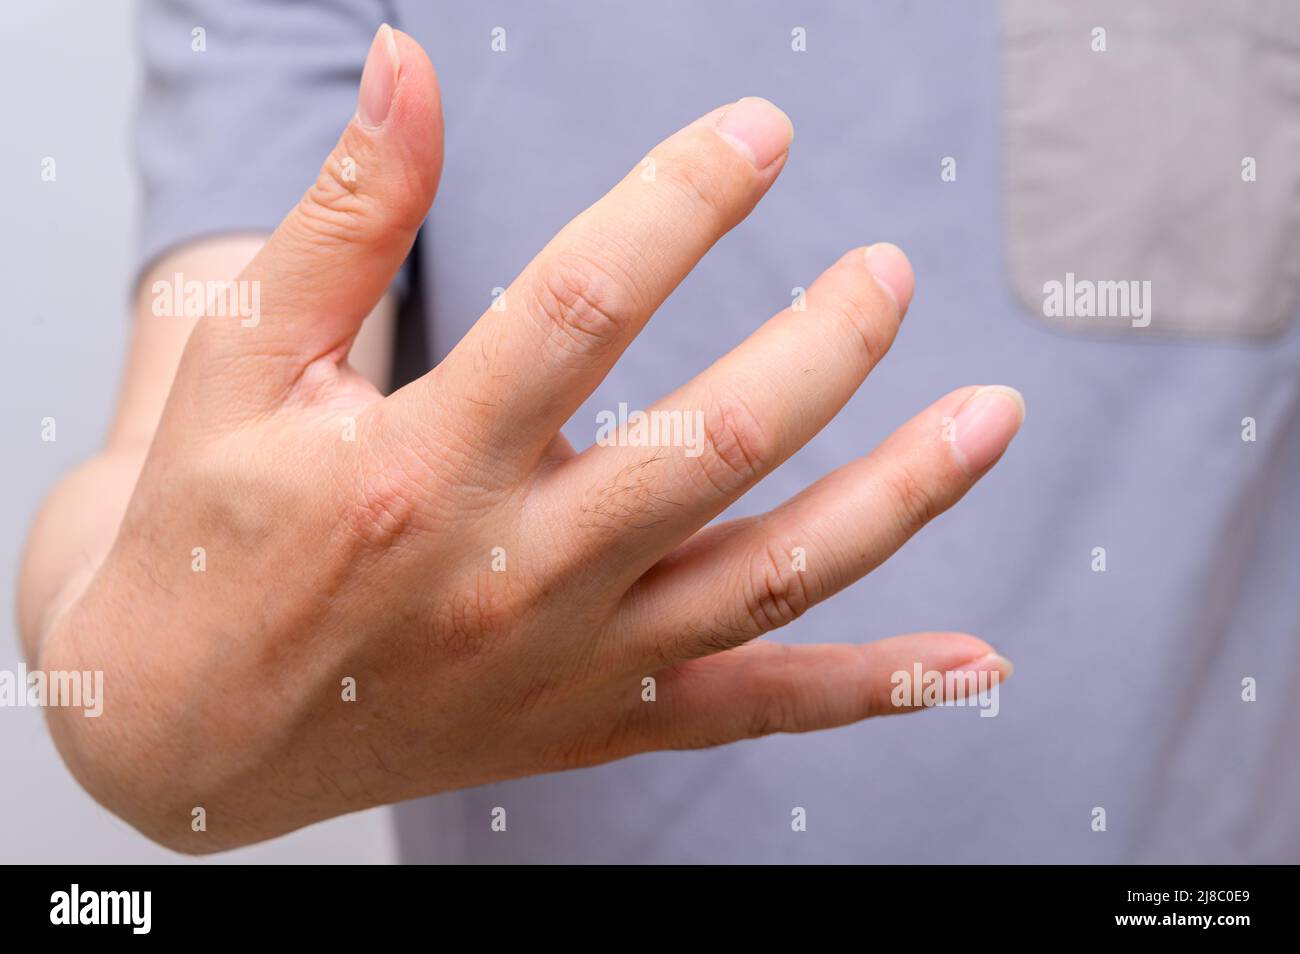 Hands of men suffering from finger joint pain. Causes of rheumatoid arthritis, gout. Health care and medical concept. Stock Photo